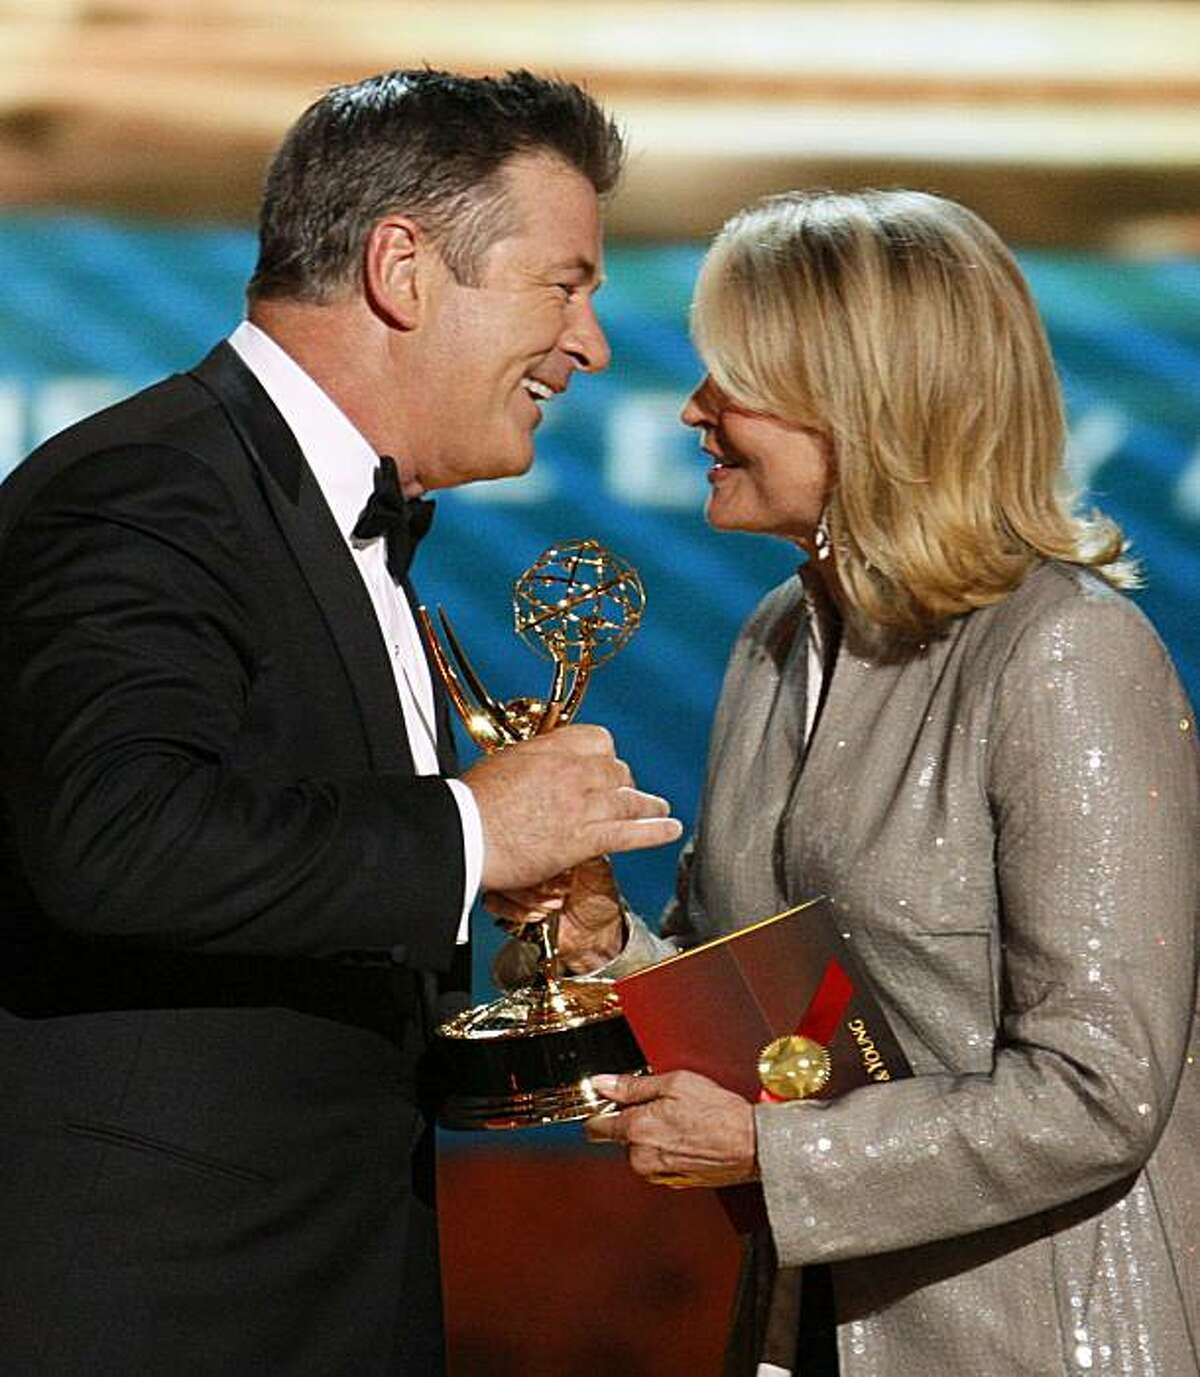 Actor Alec Baldwin accepts the award for outstanding lead actor in a comedy series for "30 Rock" from presenter Candice Bergen at the 60th annual Primetime Emmy Awards in Los Angeles September 21, 2008. REUTERS/Lucy Nicholson (UNITED STATES)